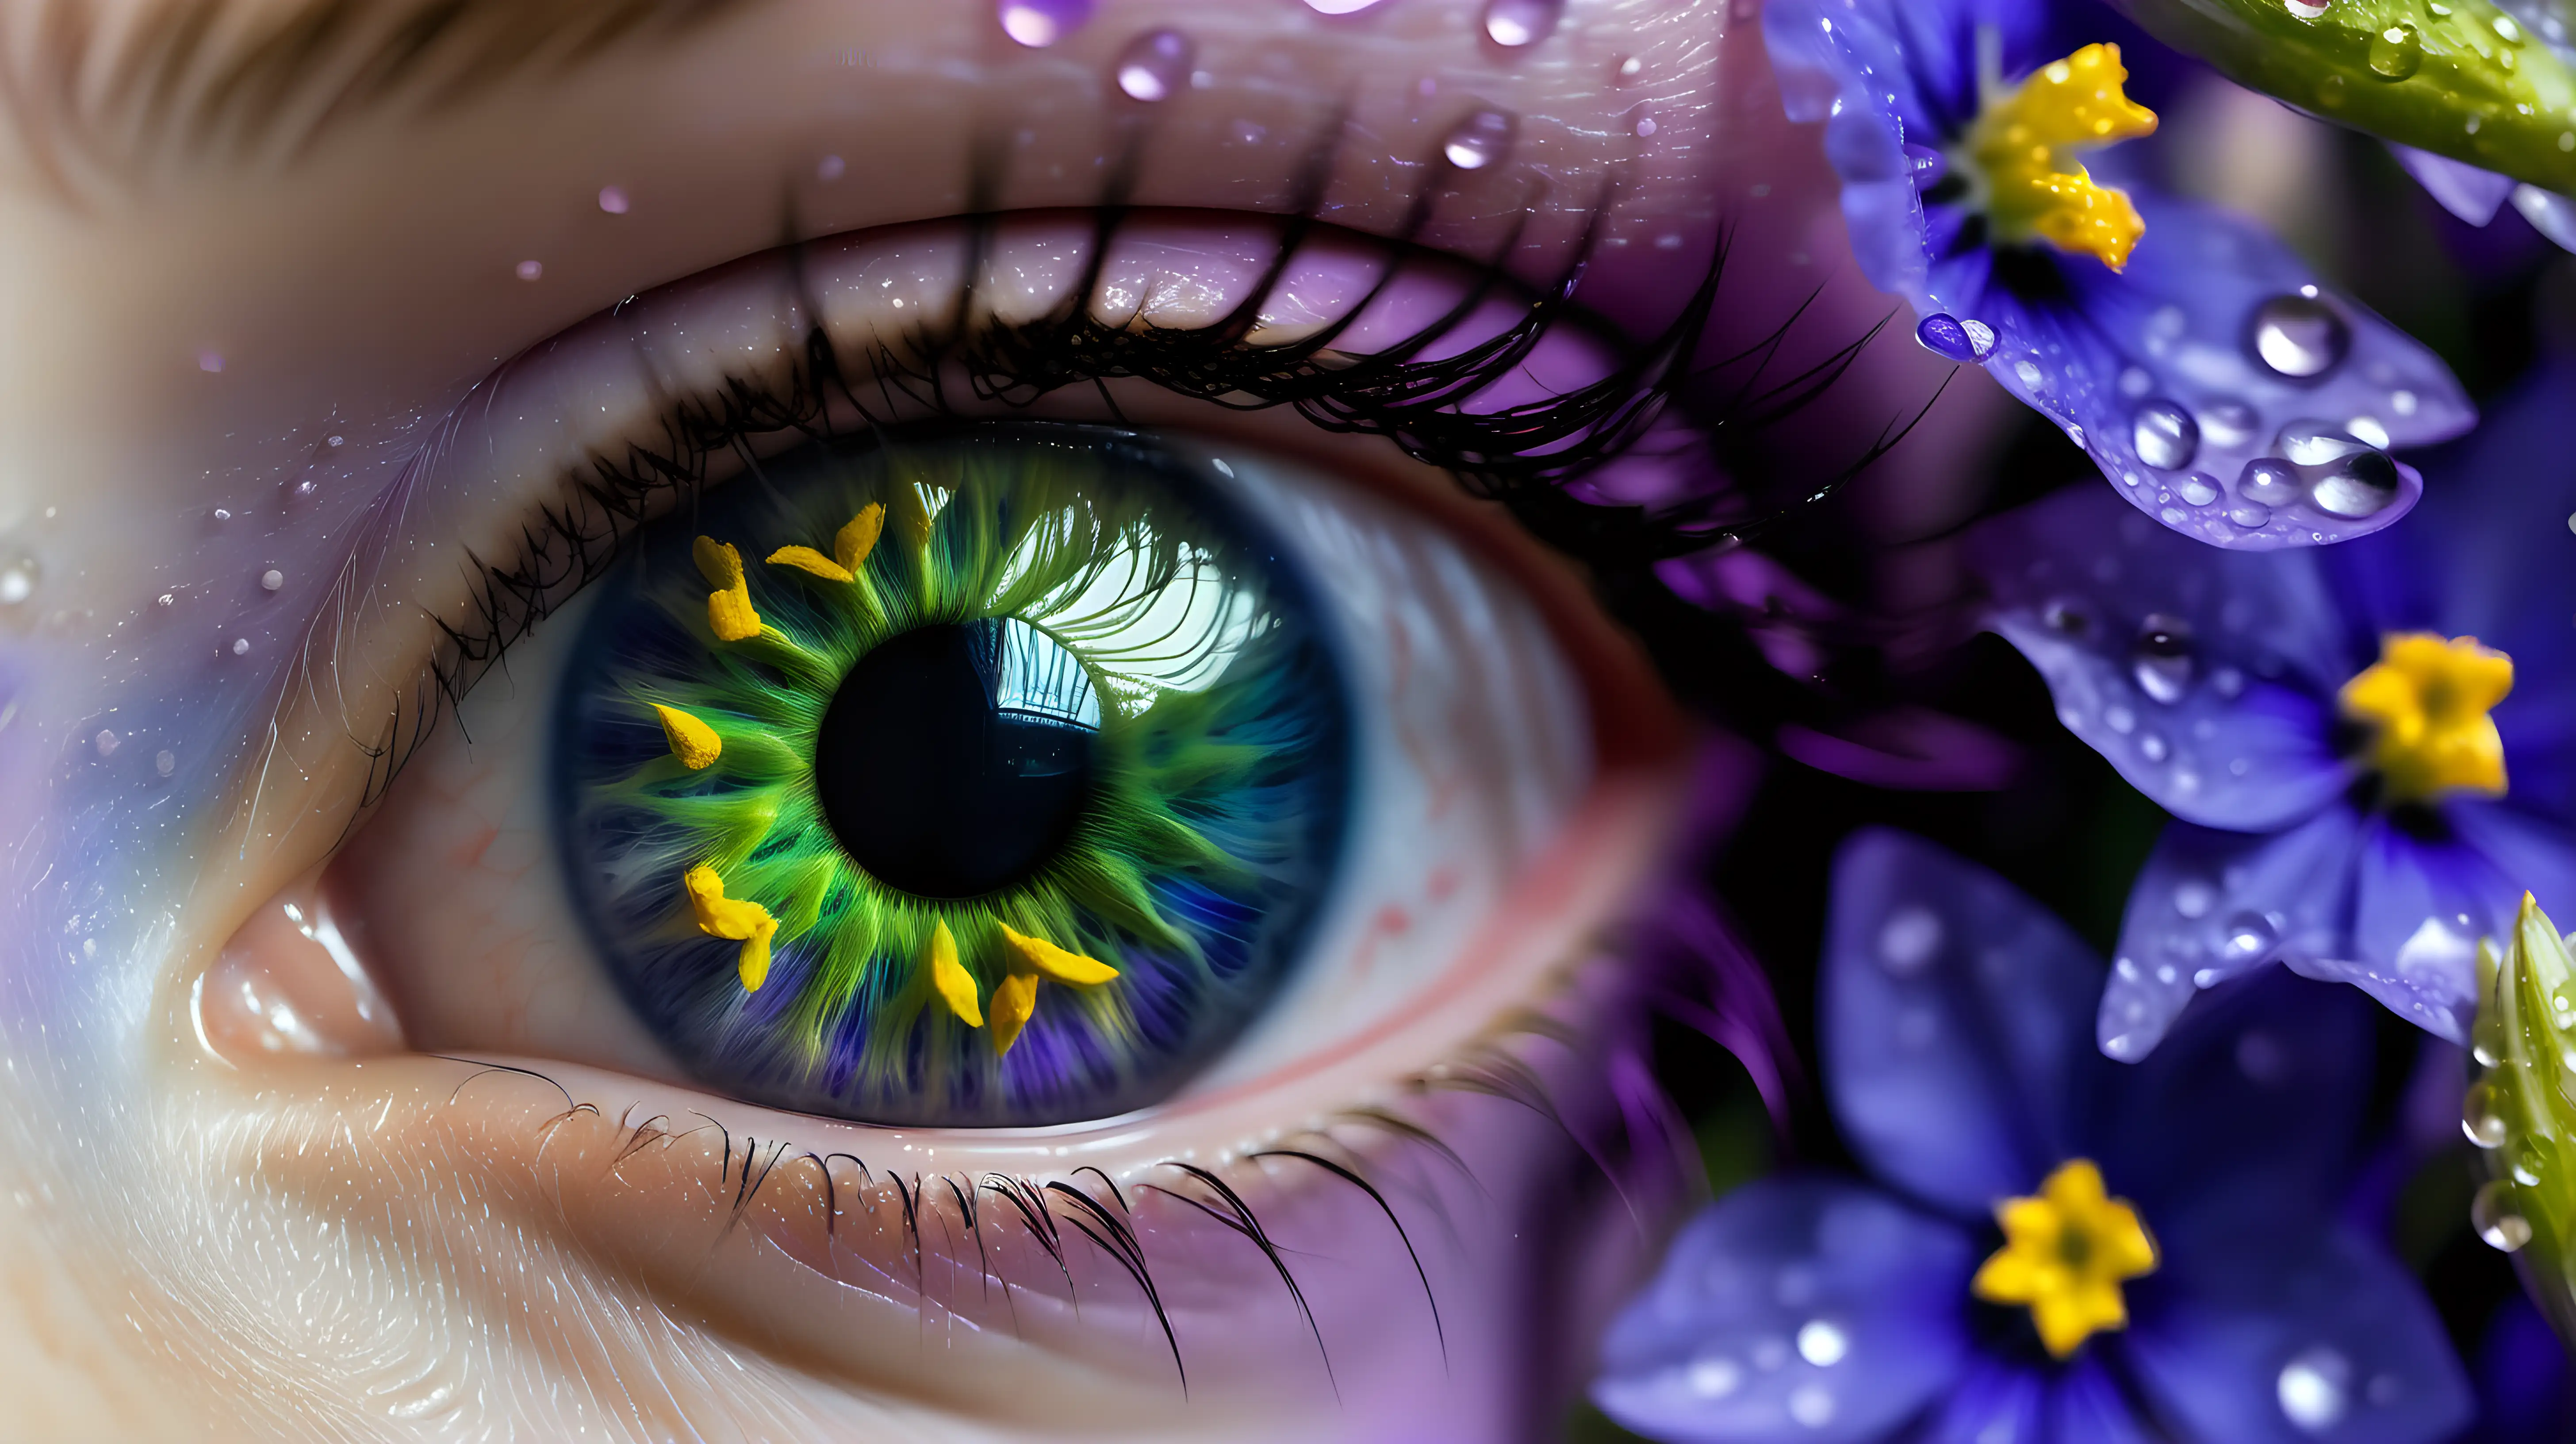 Tranquil Green Eye Amidst Violet and Indigo Garden with Raindrops